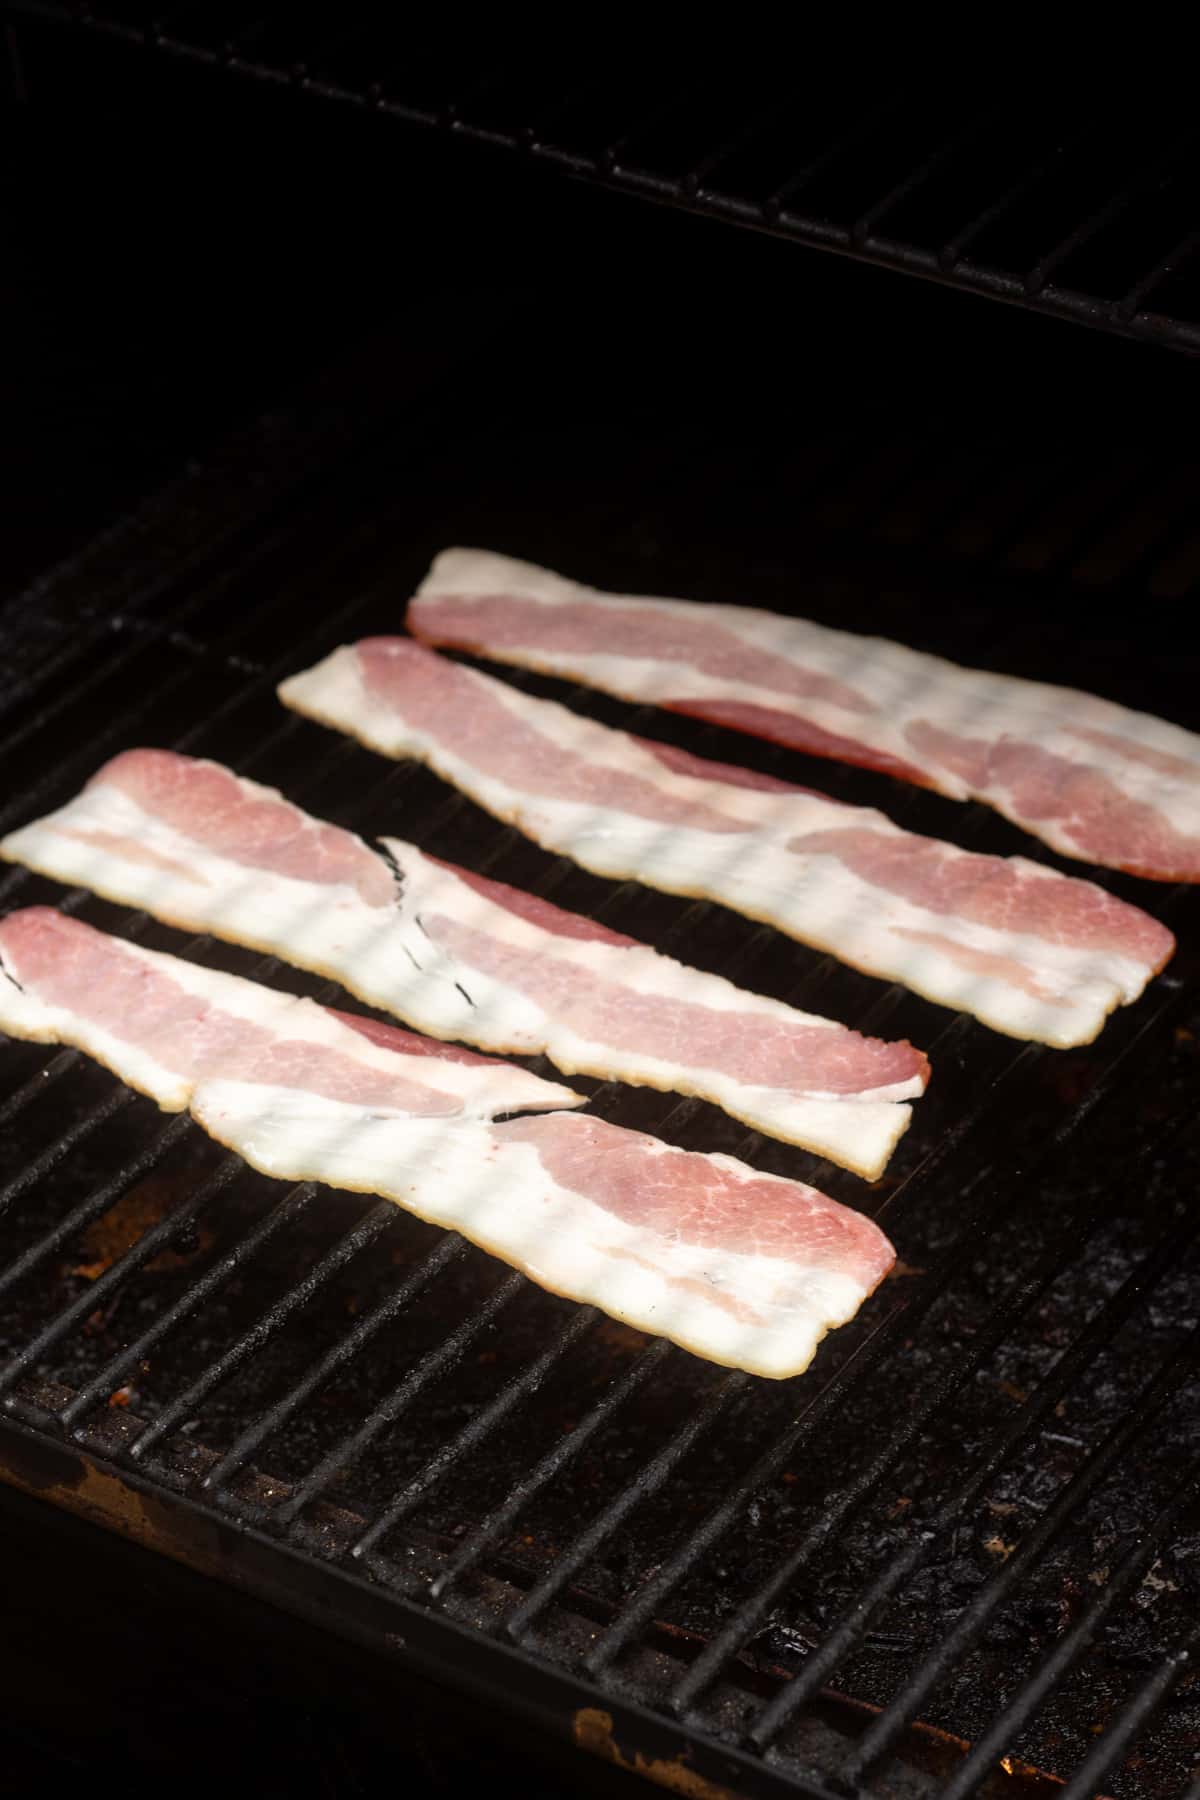 Raw bacon slices on a traeger grill